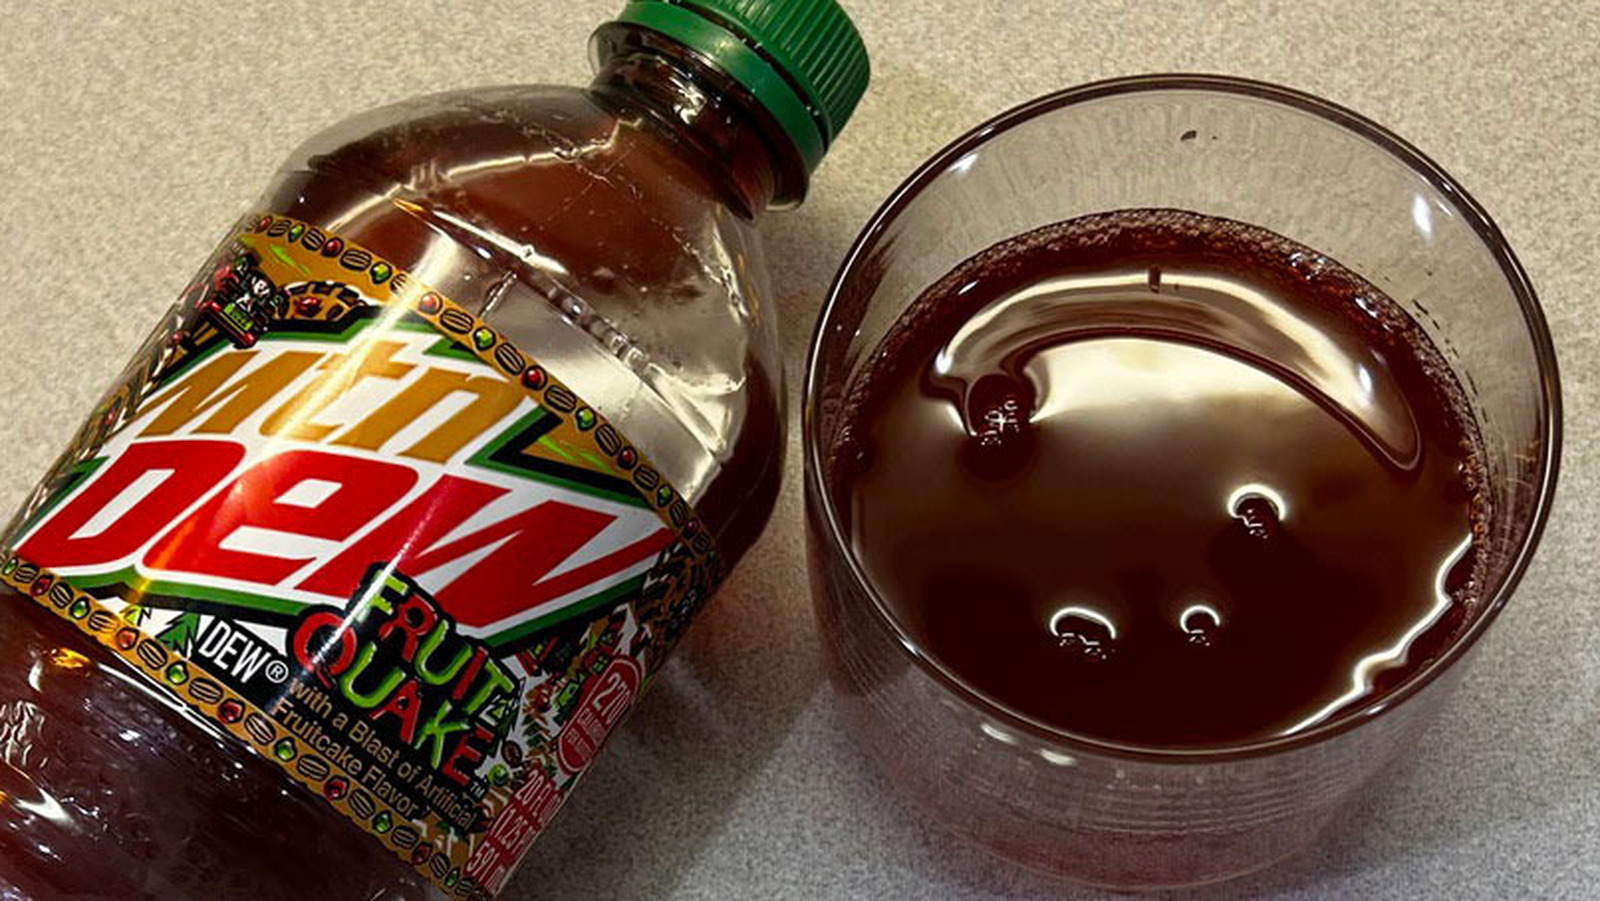 We Tried Mountain Dew's Holiday Fruit Quake Flavor. It Was Better Than